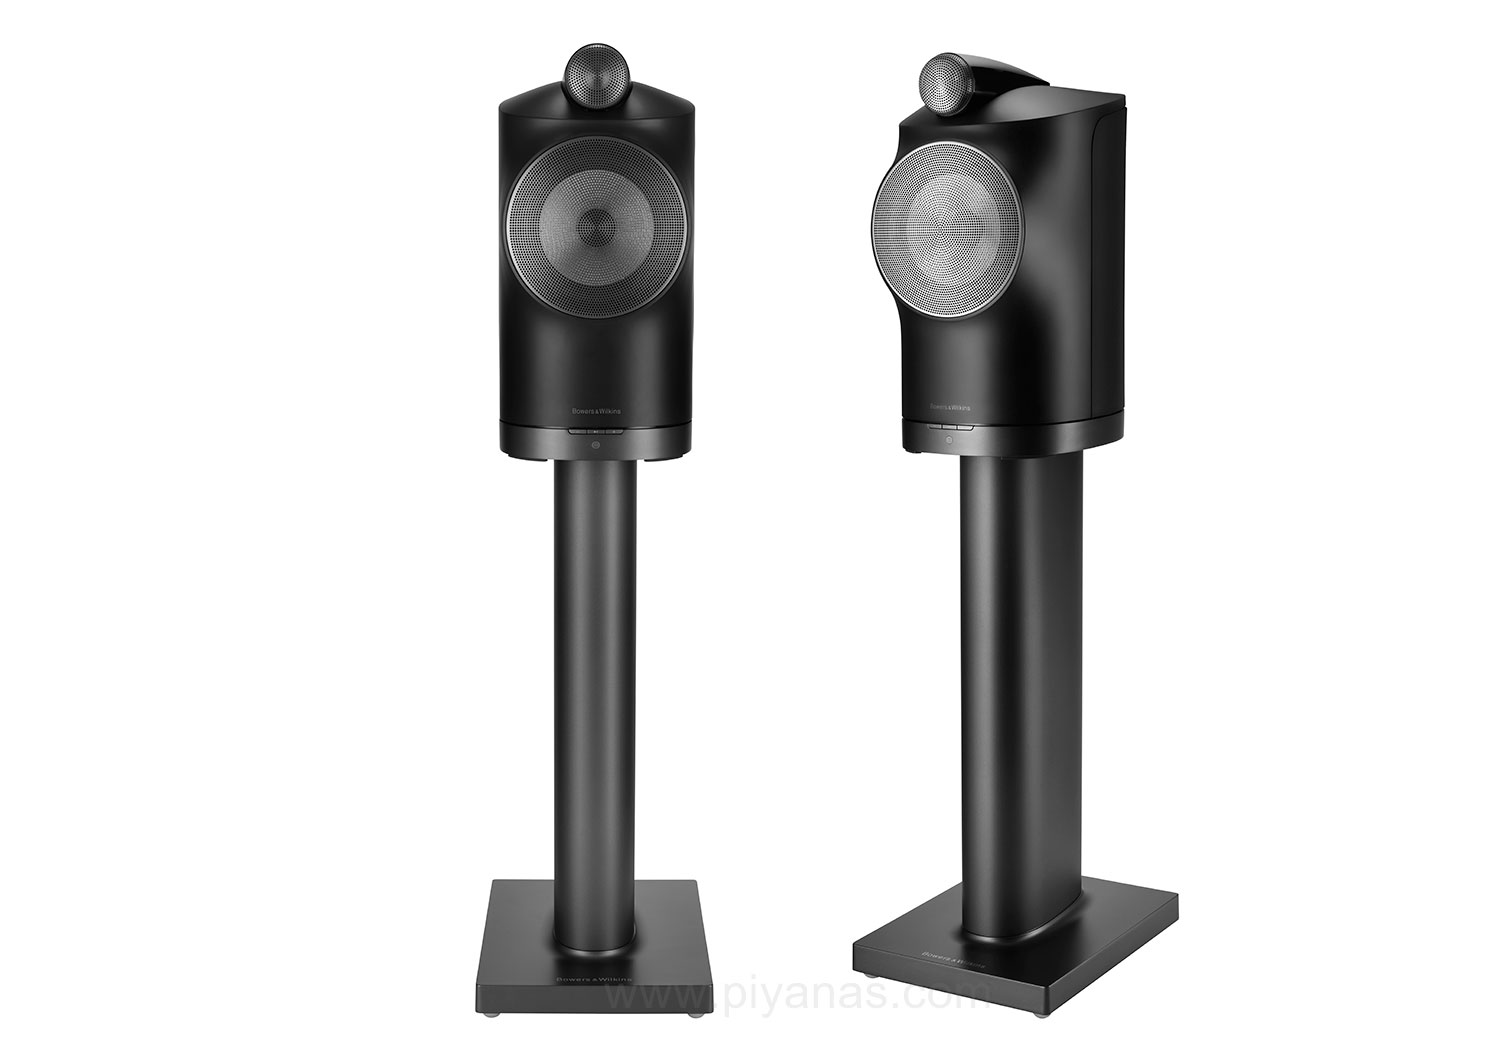 Formation DUO (Black)
FS-Duo Stand (Black) PI-7 (White)